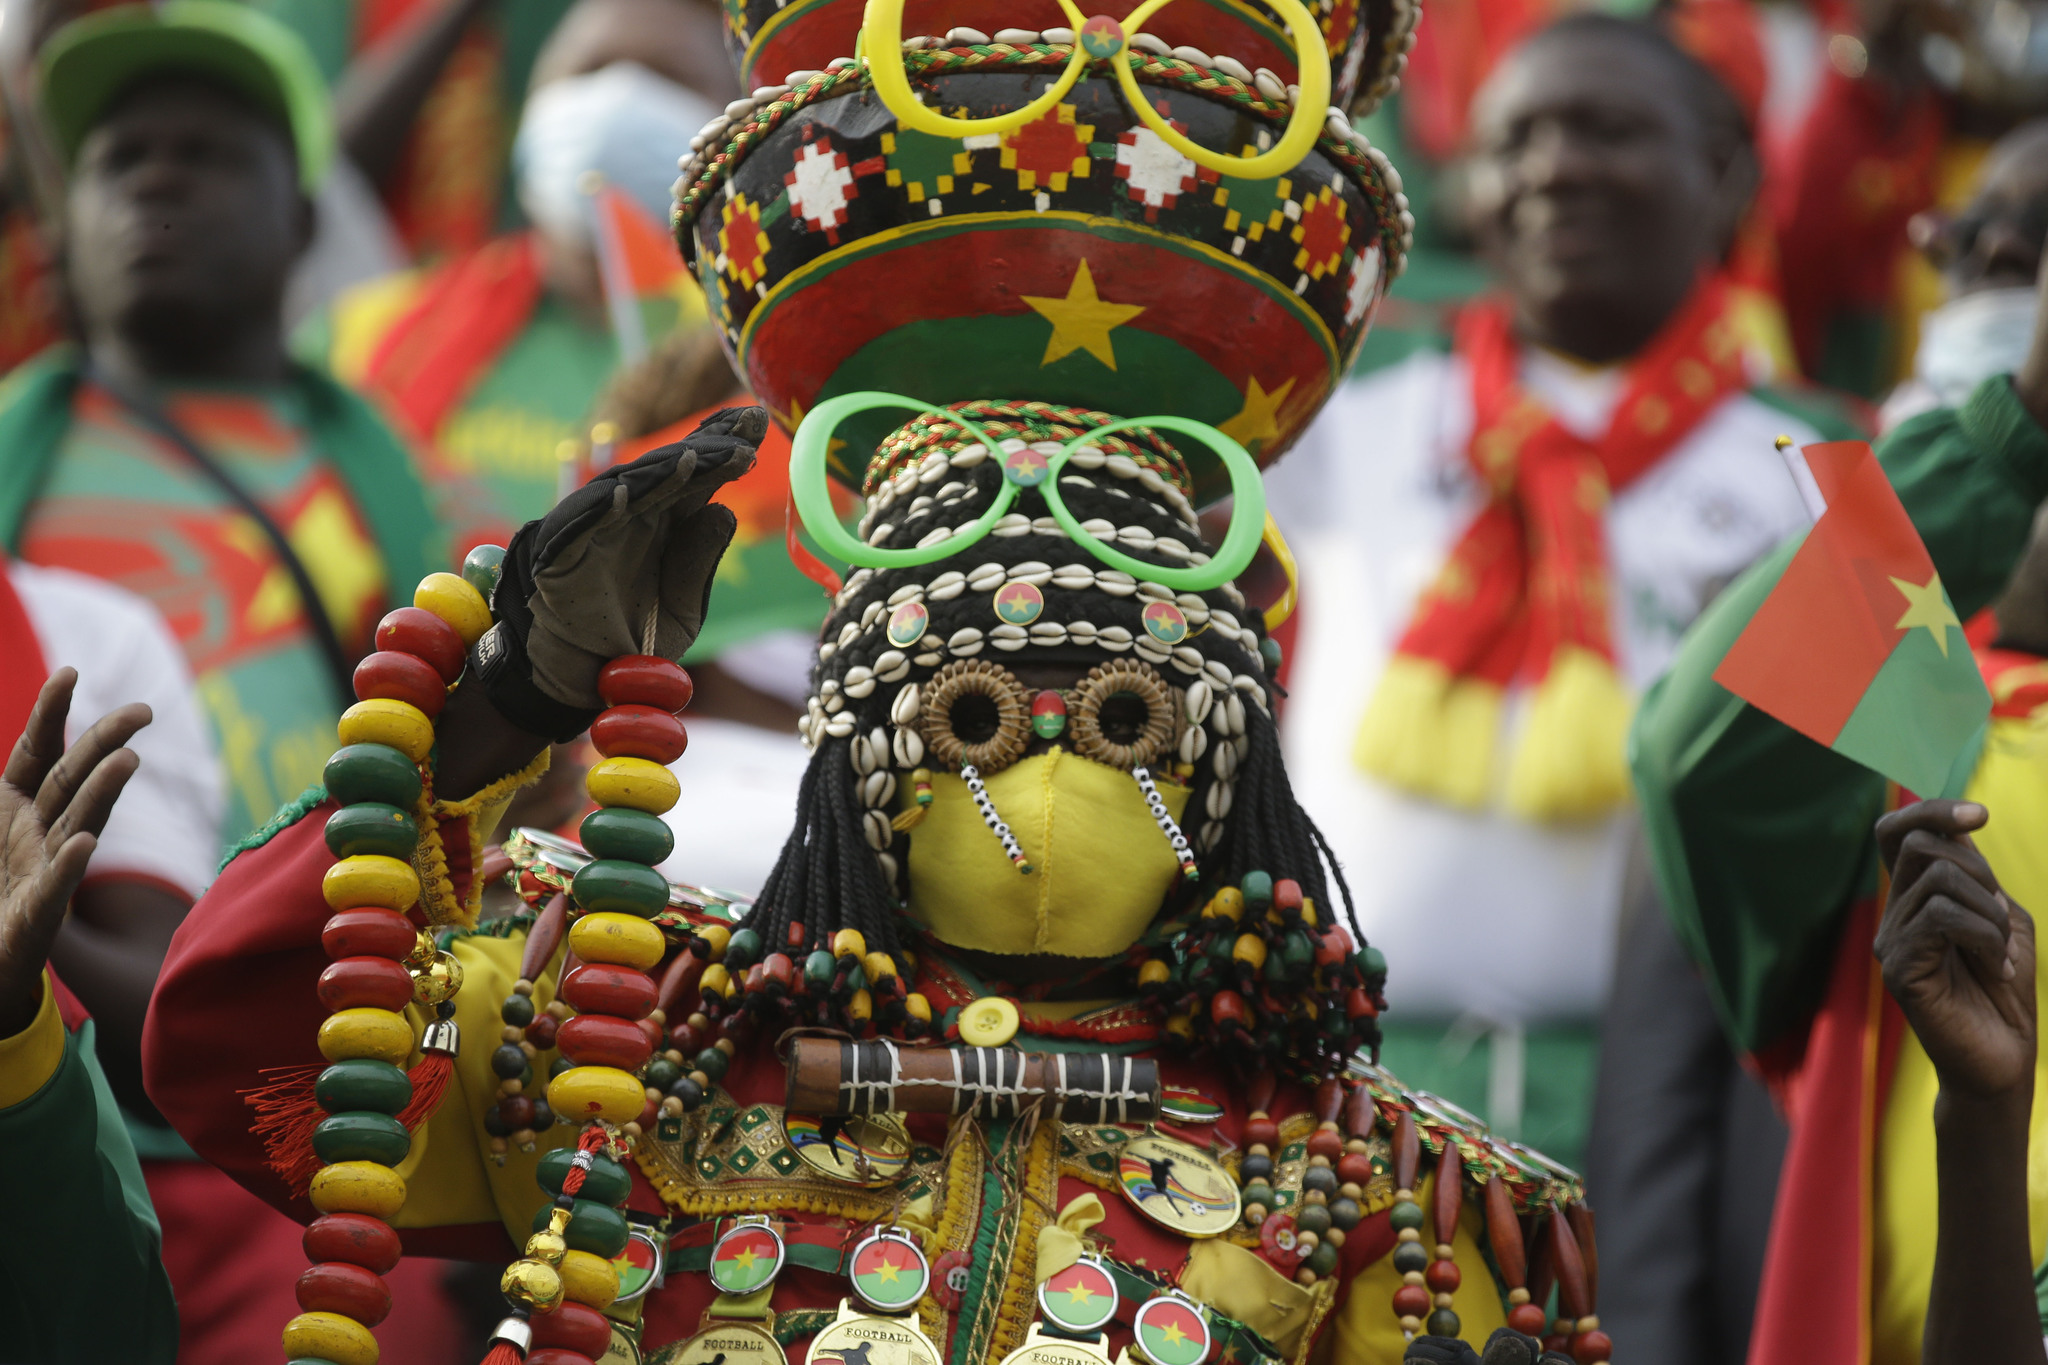 A Burkina Faso fan before the African Cup of Nations 2022.